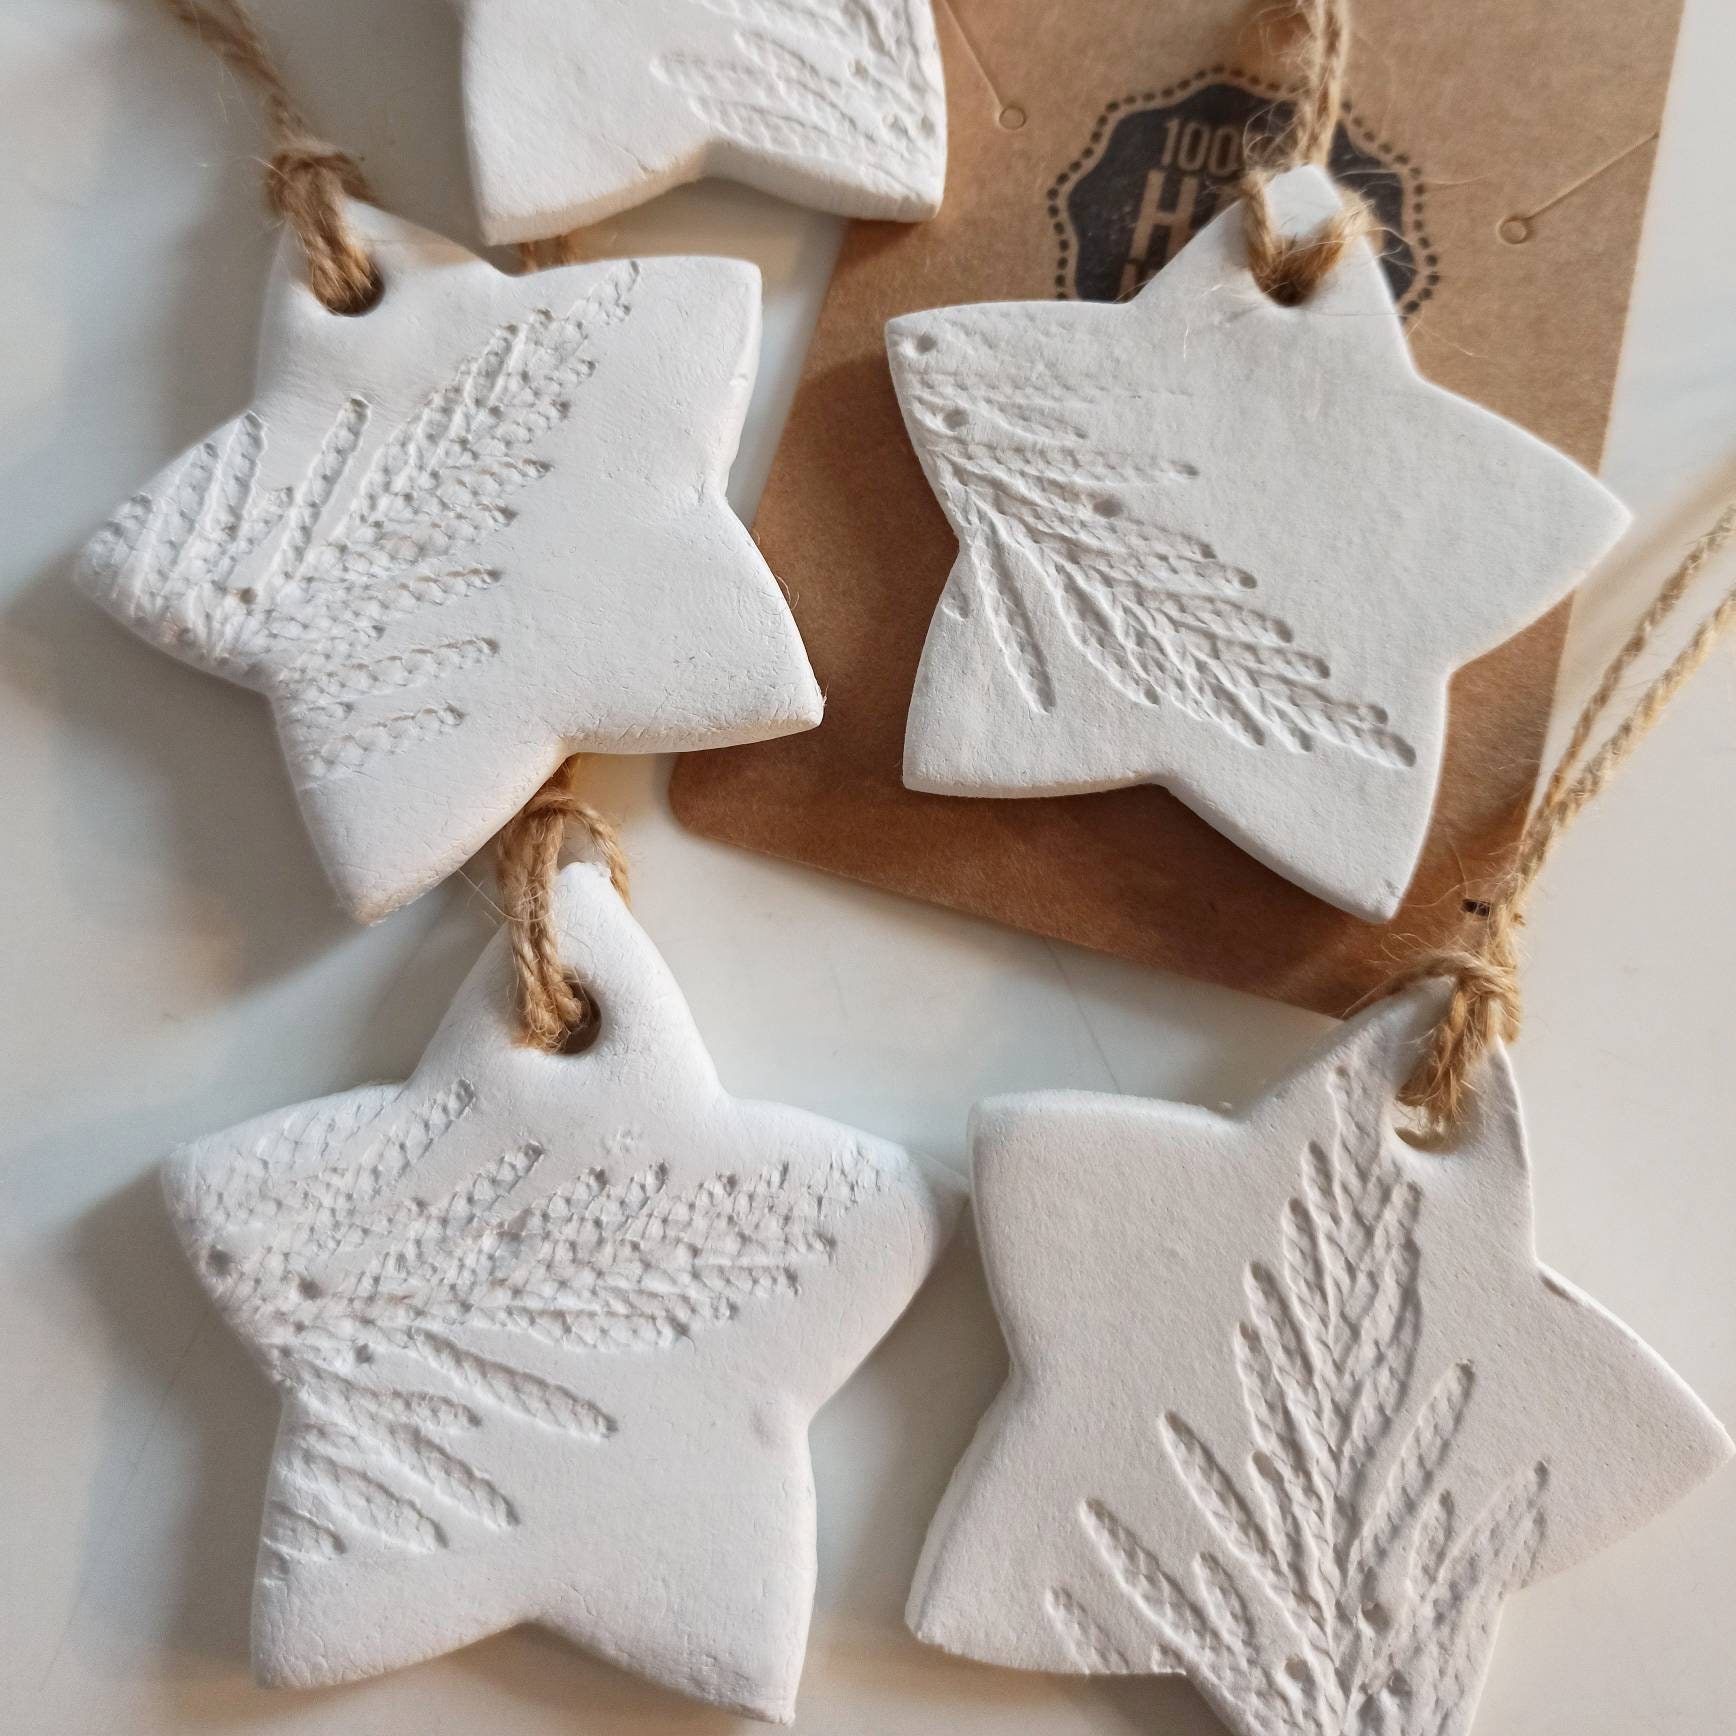 Pack of 10 Handmade Patterned Silver & White Christmas Bauble Ornament  Kraft Gift Tags for Presents 